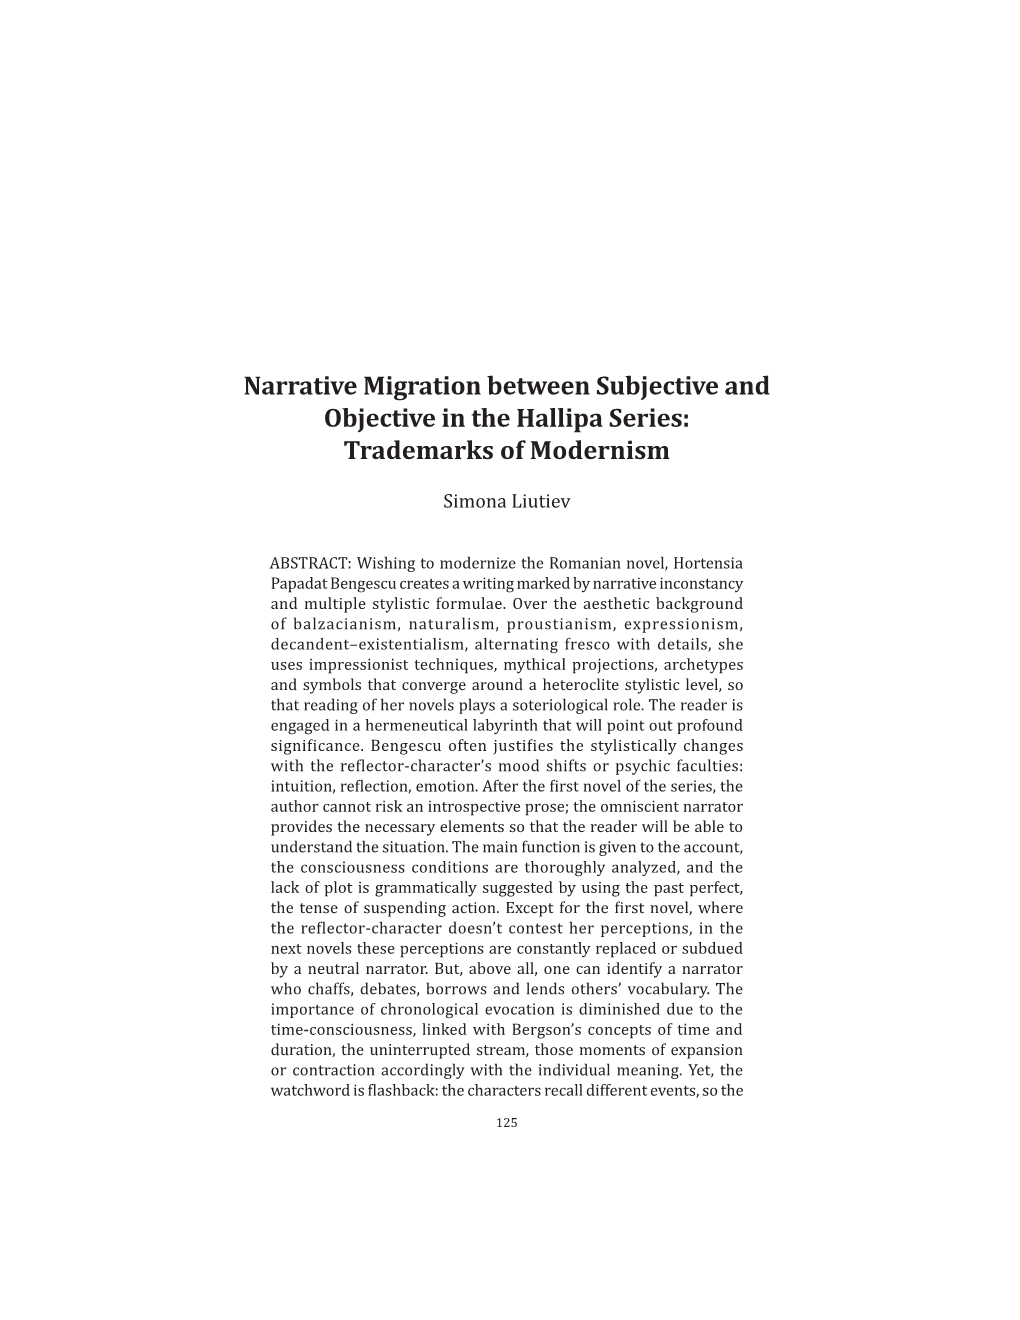 Narrative Migration Between Subjective and Objective in the Hallipa Series: Trademarks of Modernism